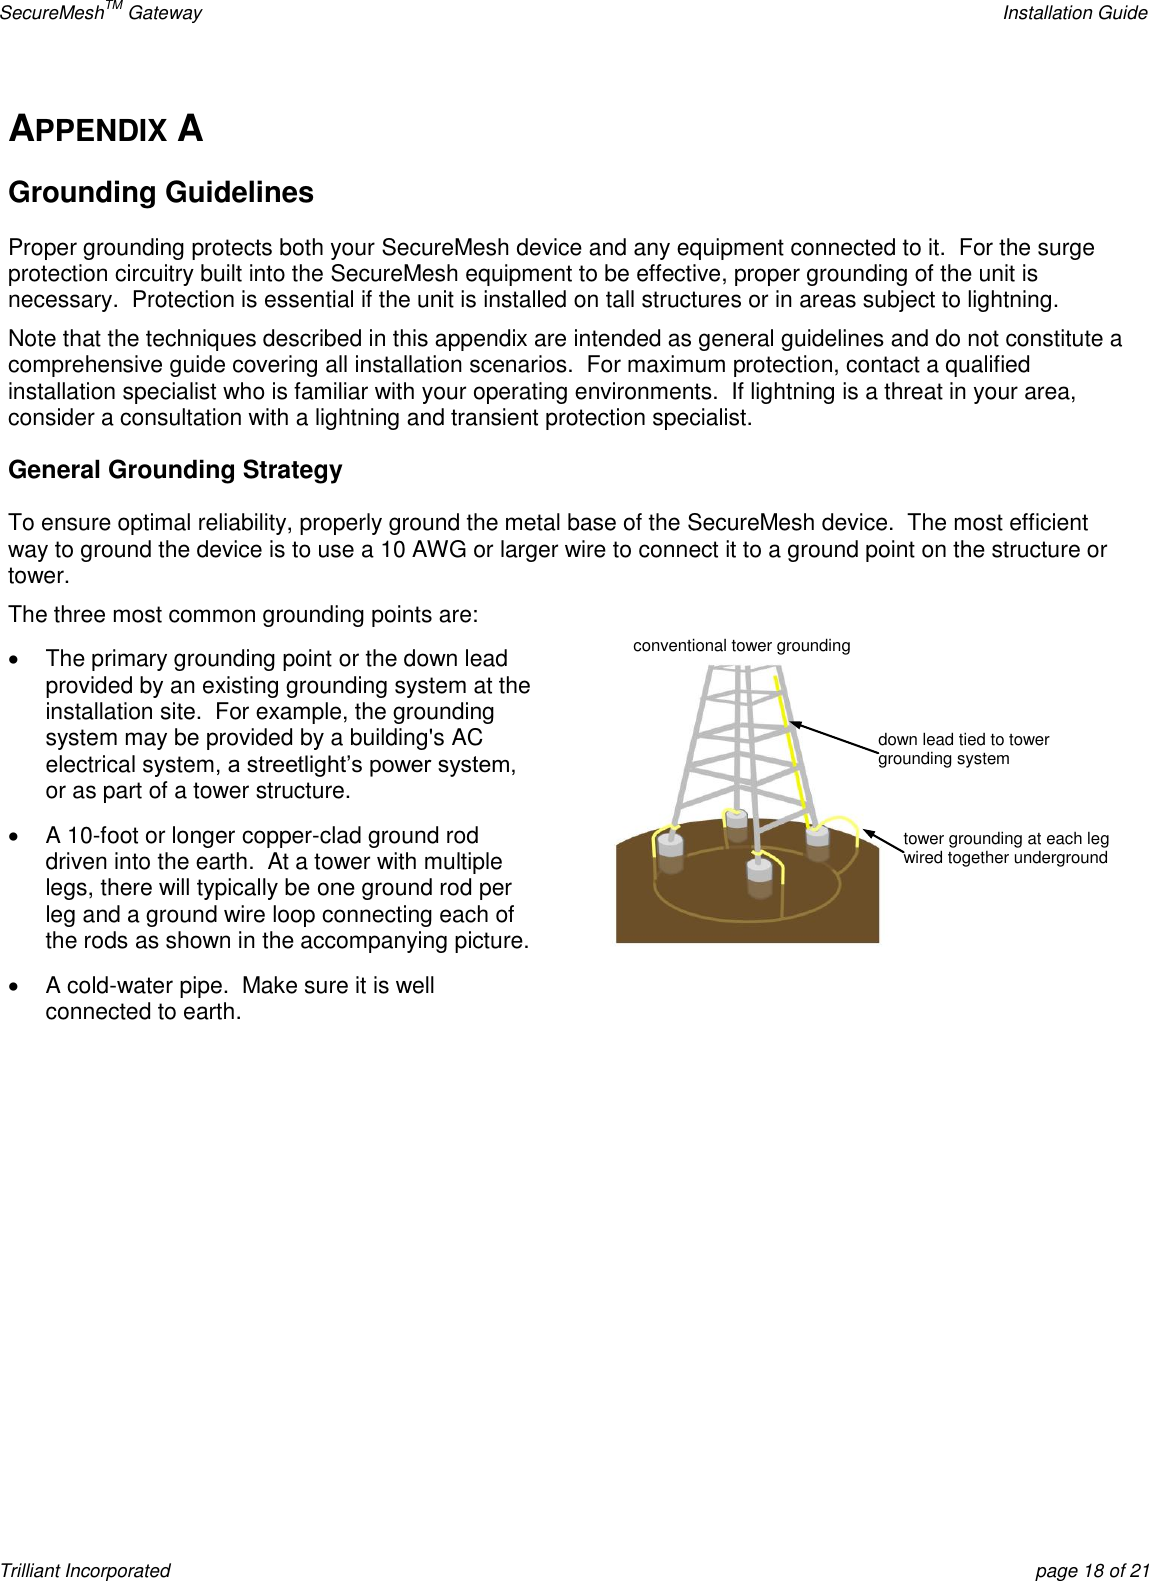 SecureMeshTM Gateway    Installation Guide Trilliant Incorporated  page 18 of 21 APPENDIX A Grounding Guidelines Proper grounding protects both your SecureMesh device and any equipment connected to it.  For the surge protection circuitry built into the SecureMesh equipment to be effective, proper grounding of the unit is necessary.  Protection is essential if the unit is installed on tall structures or in areas subject to lightning. Note that the techniques described in this appendix are intended as general guidelines and do not constitute a comprehensive guide covering all installation scenarios.  For maximum protection, contact a qualified installation specialist who is familiar with your operating environments.  If lightning is a threat in your area, consider a consultation with a lightning and transient protection specialist. General Grounding Strategy To ensure optimal reliability, properly ground the metal base of the SecureMesh device.  The most efficient way to ground the device is to use a 10 AWG or larger wire to connect it to a ground point on the structure or tower. The three most common grounding points are:   The primary grounding point or the down lead provided by an existing grounding system at the installation site.  For example, the grounding system may be provided by a building&apos;s AC electrical system, a streetlight’s power system, or as part of a tower structure.   A 10-foot or longer copper-clad ground rod driven into the earth.  At a tower with multiple legs, there will typically be one ground rod per leg and a ground wire loop connecting each of the rods as shown in the accompanying picture.    A cold-water pipe.  Make sure it is well connected to earth.   tower grounding at each leg wired together underground  down lead tied to tower grounding system  conventional tower grounding  